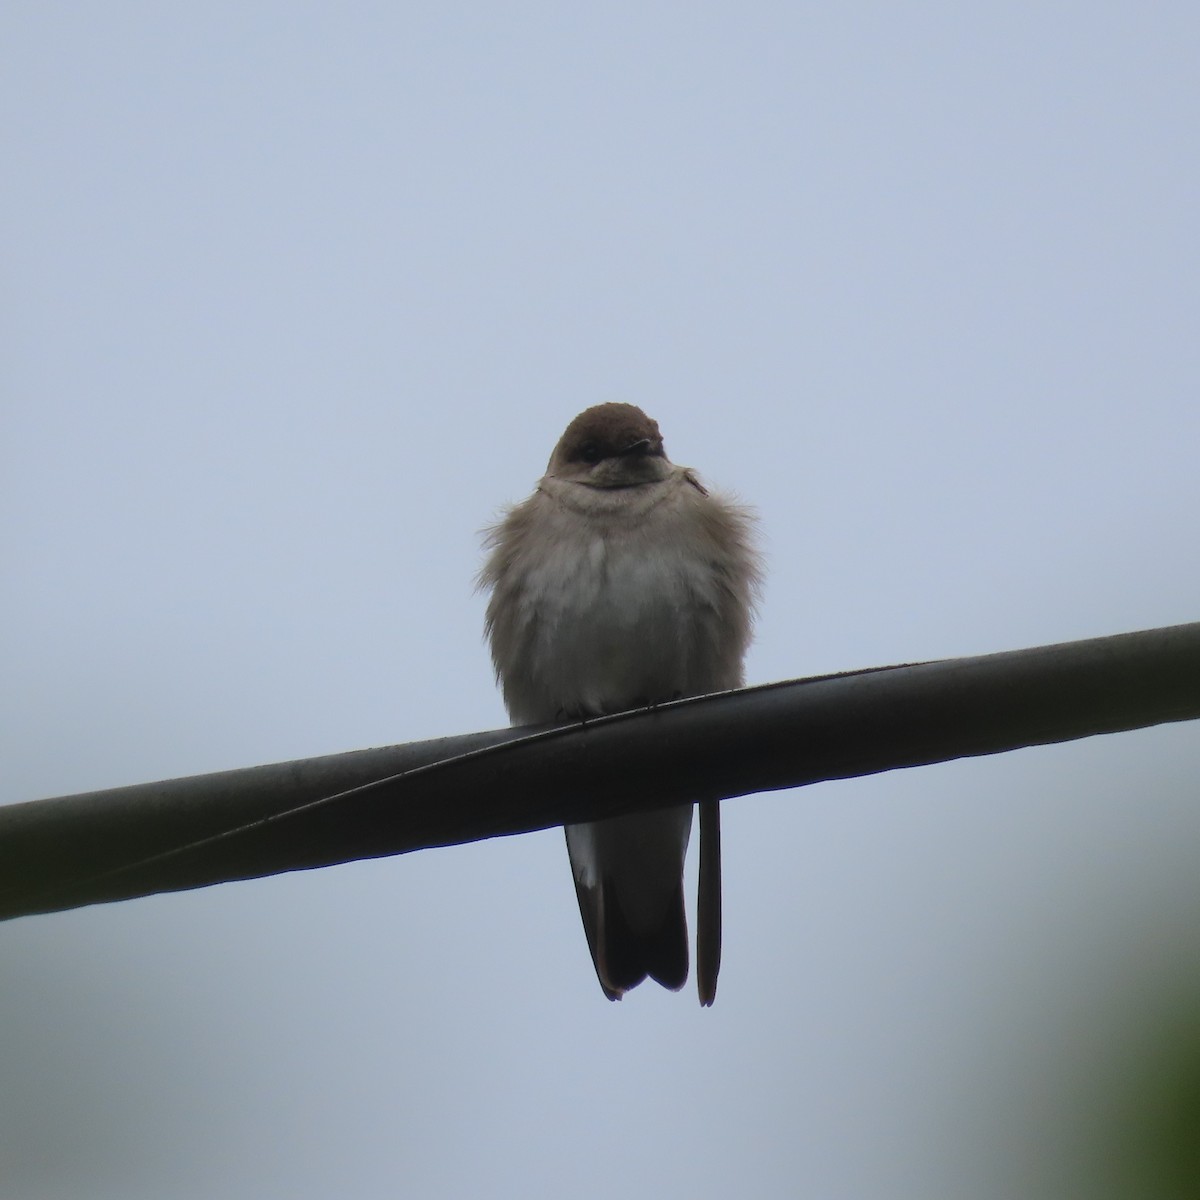 Northern Rough-winged Swallow - Suzanne Beauchesne